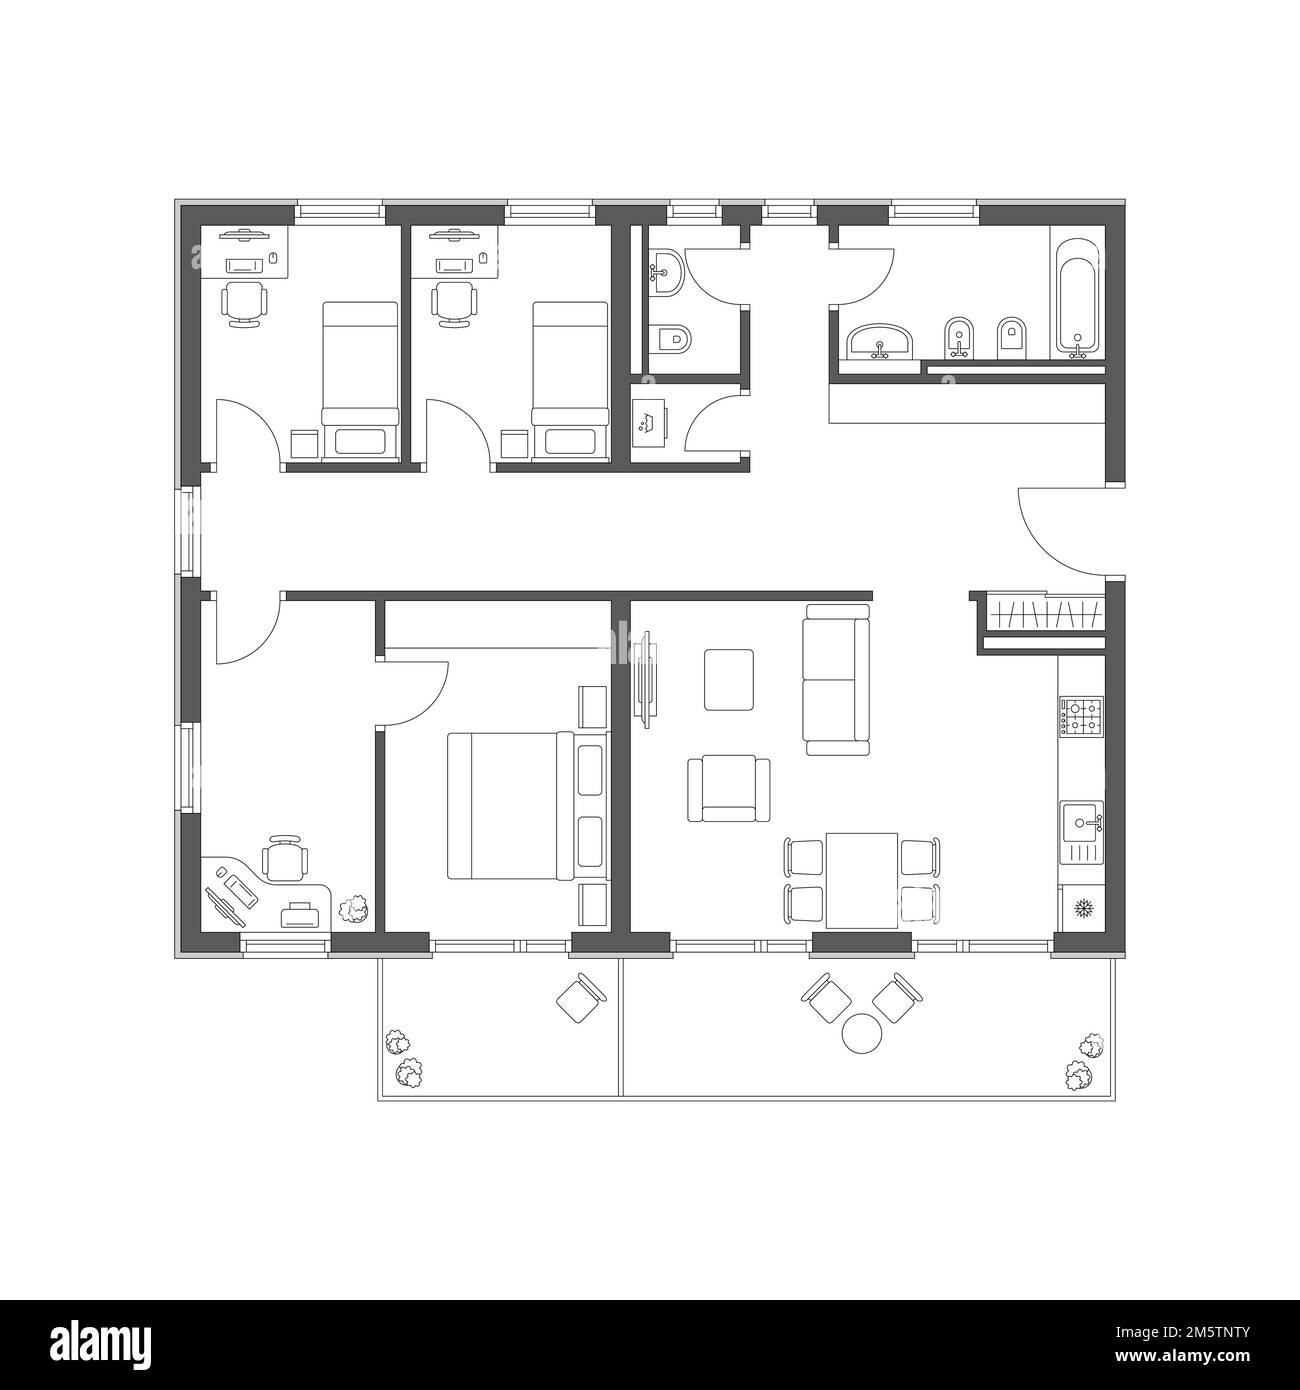 Plan of the apartment with furniture Stock Vector